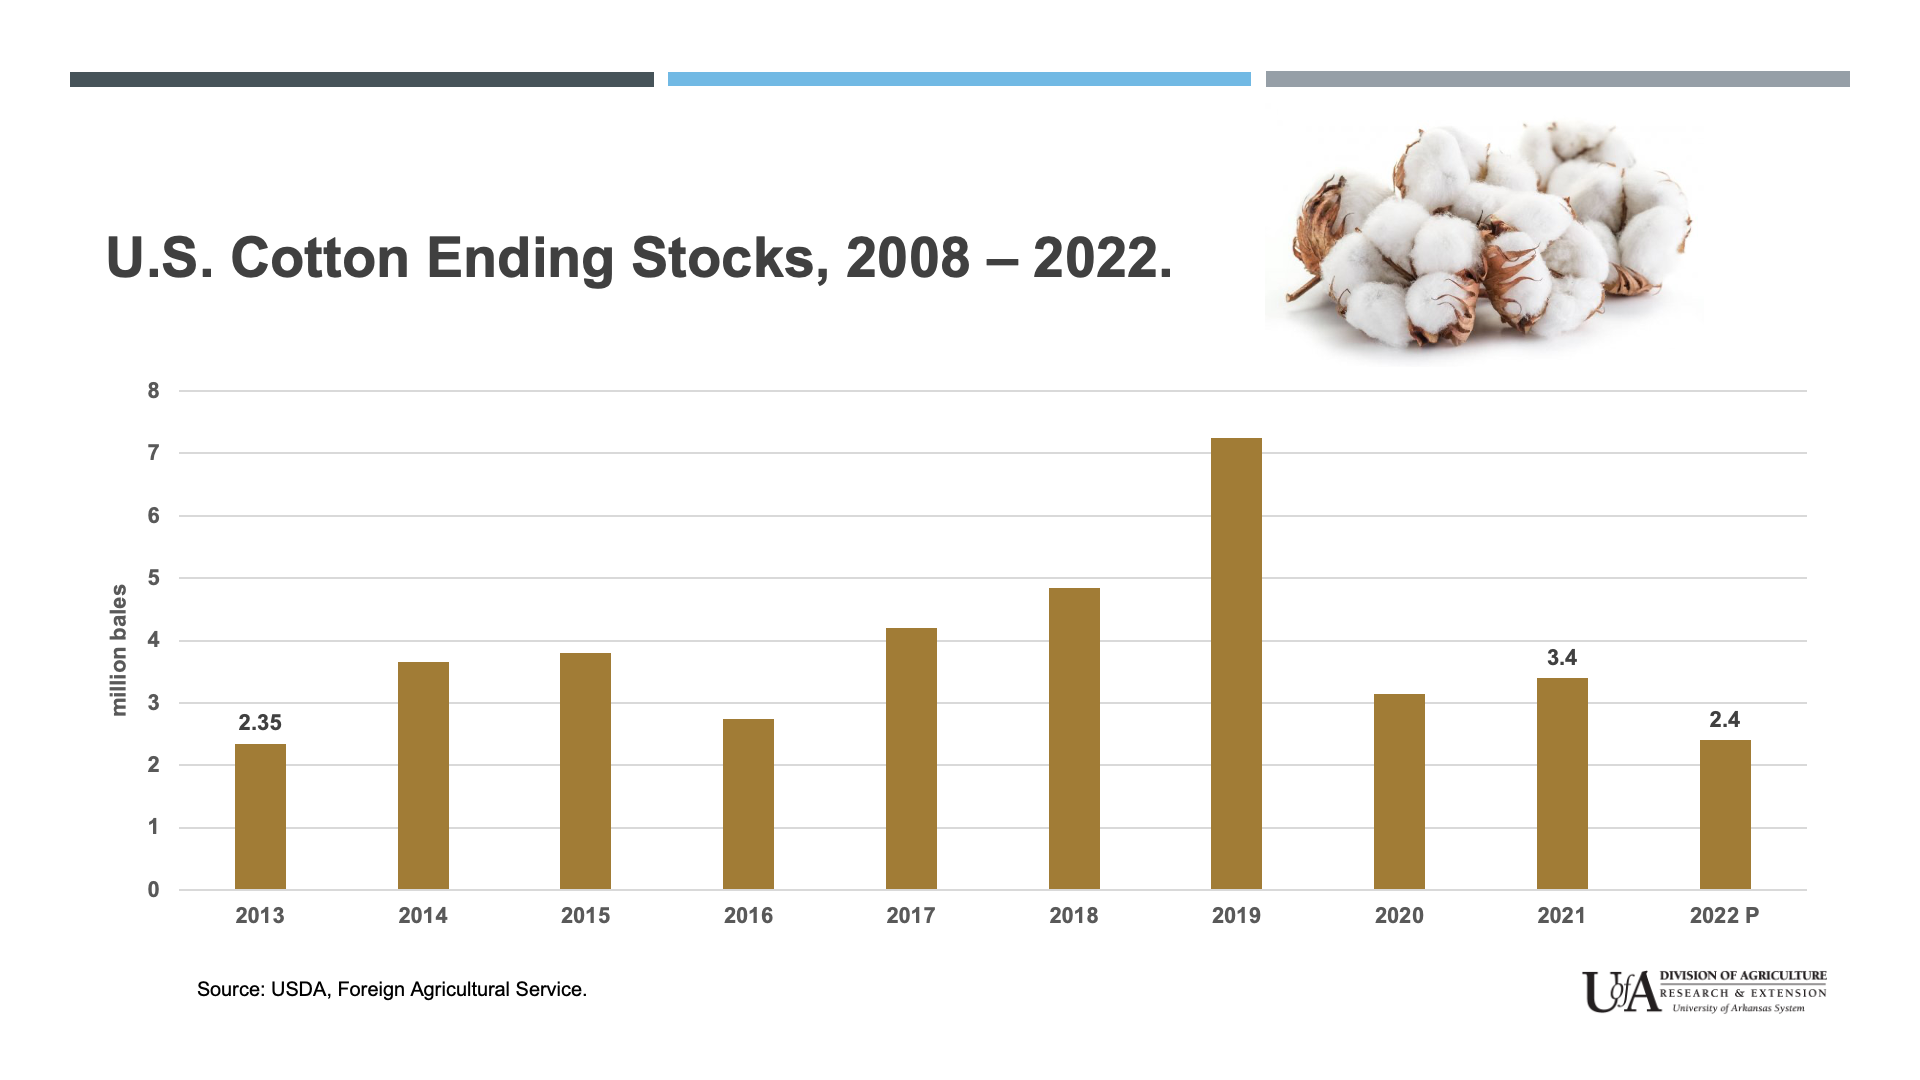 Chart showing US cotton ending stocks starting in 2013.